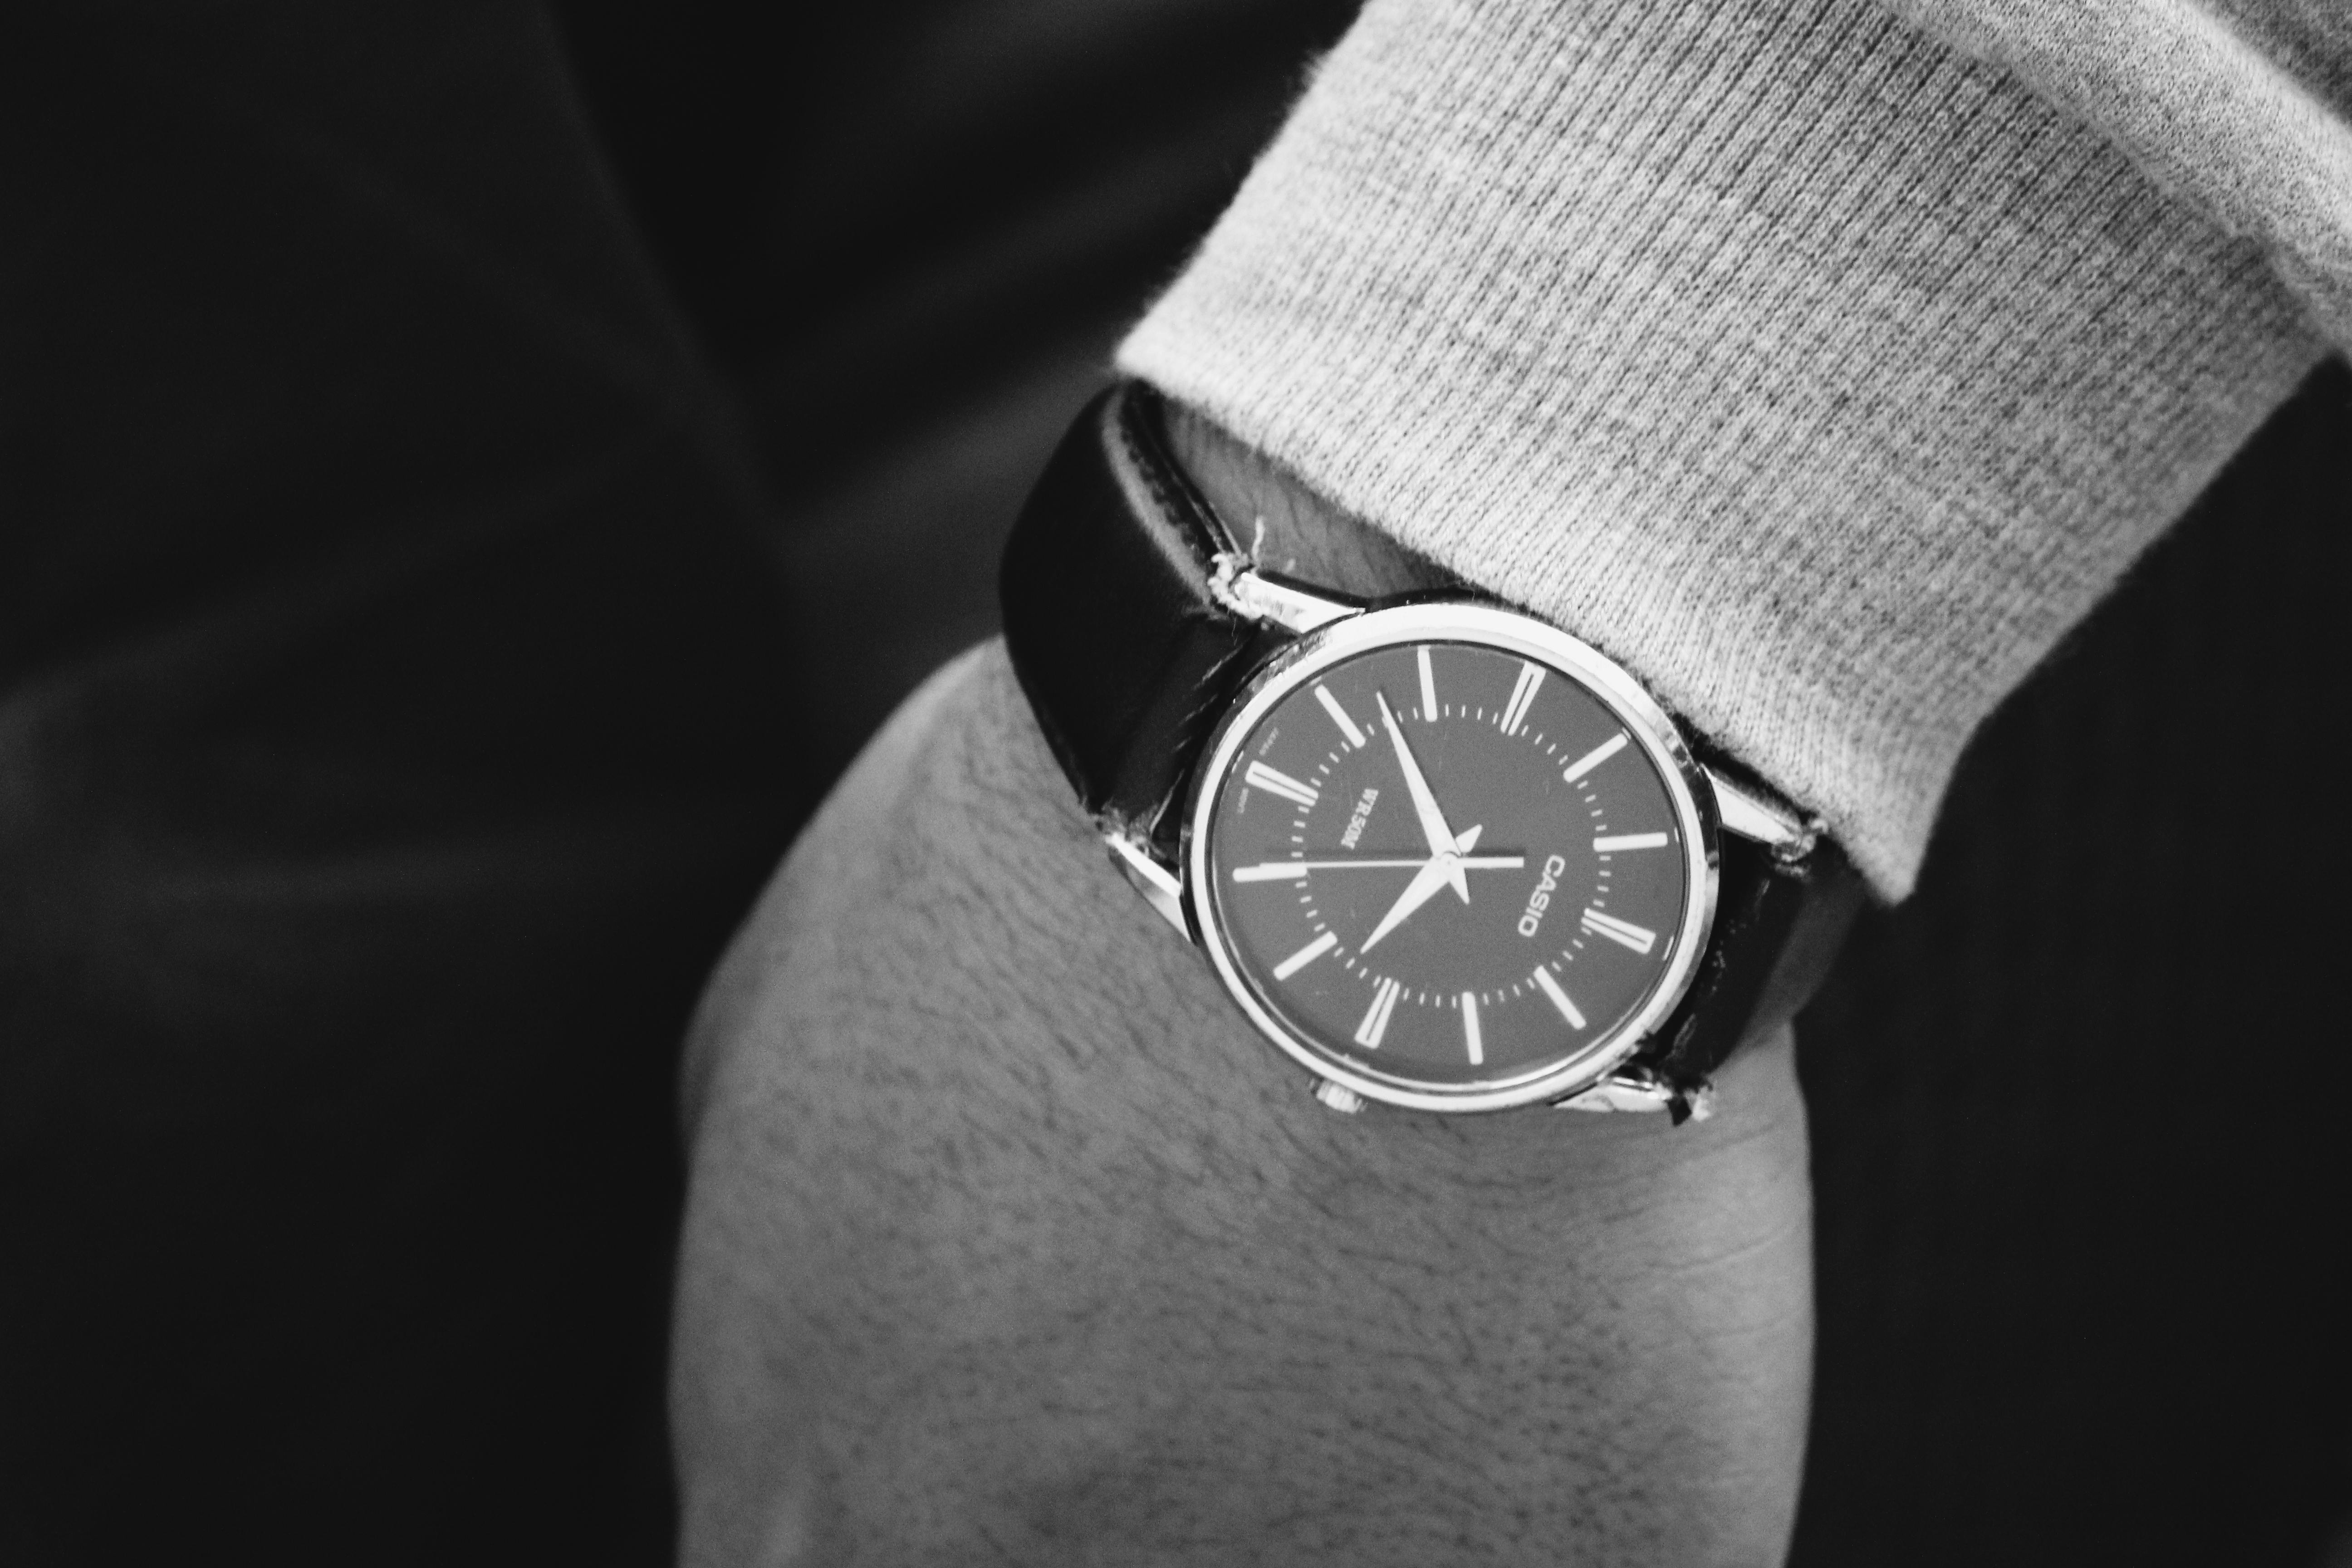 Person Showing Watch · Free Stock Photo - 5184 x 3456 jpeg 1994kB